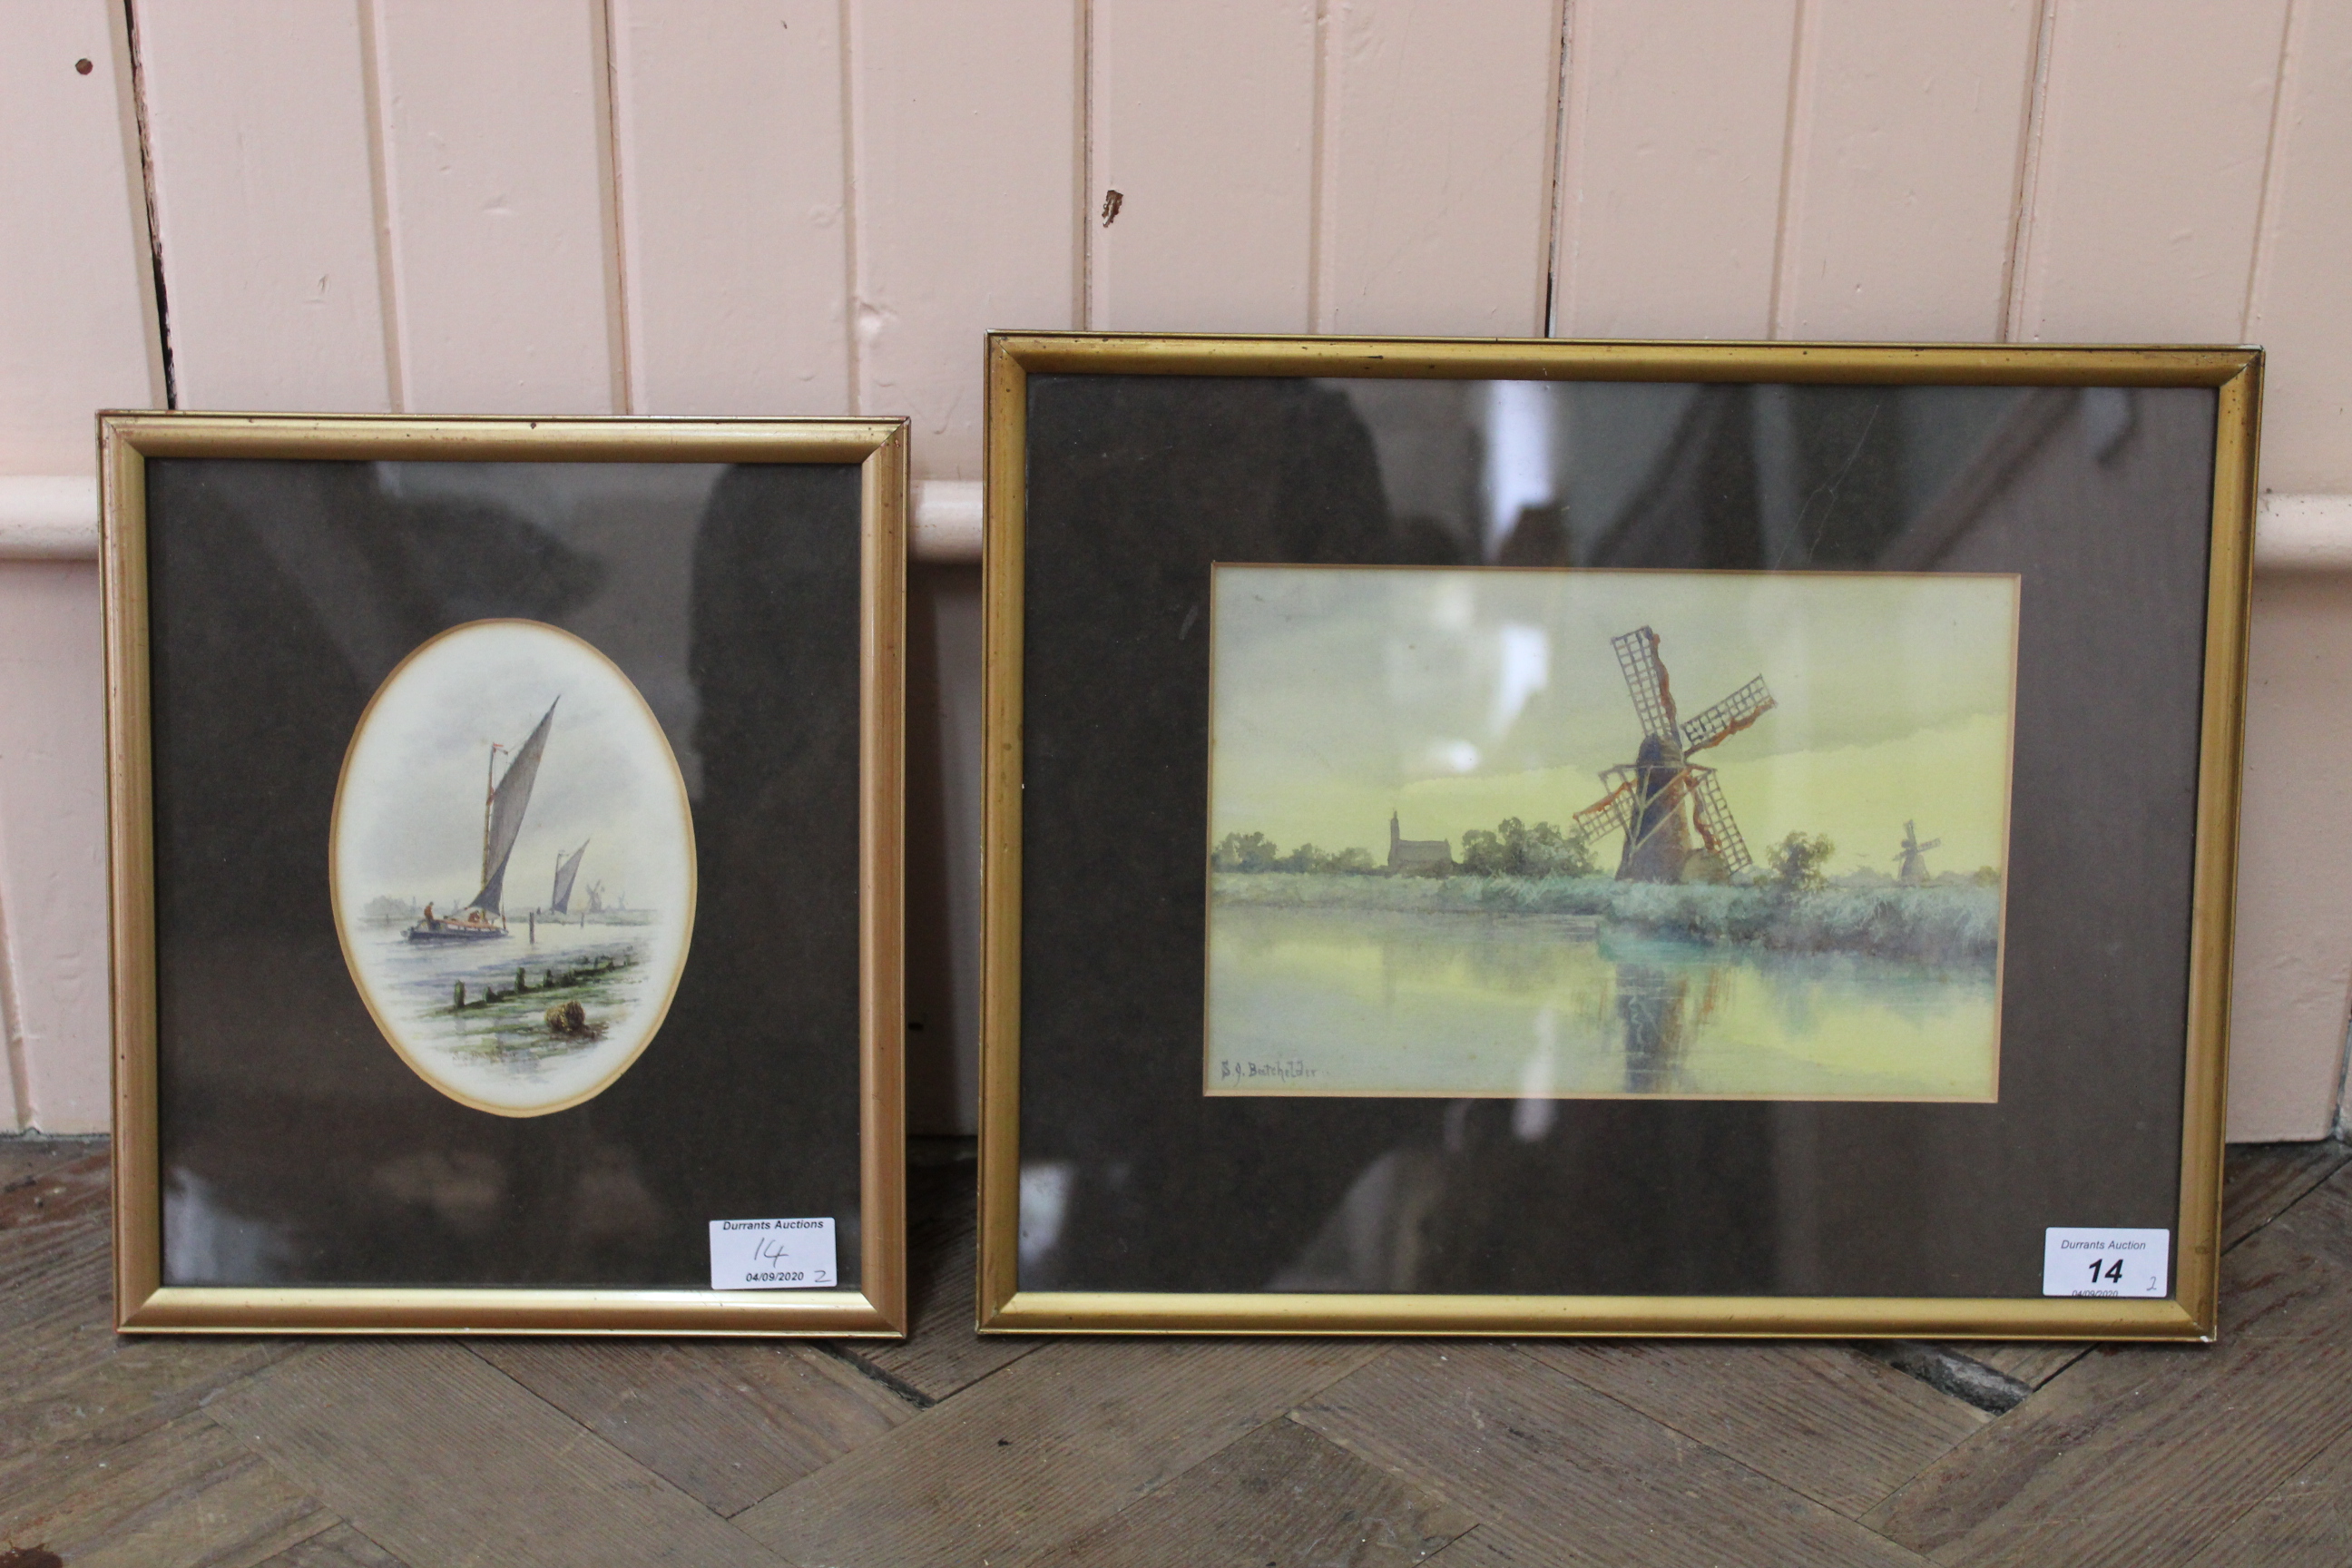 A broadland watercolour of a windmill signed S J Batchelder 6 1/4" x 9 1/2" plus an oval